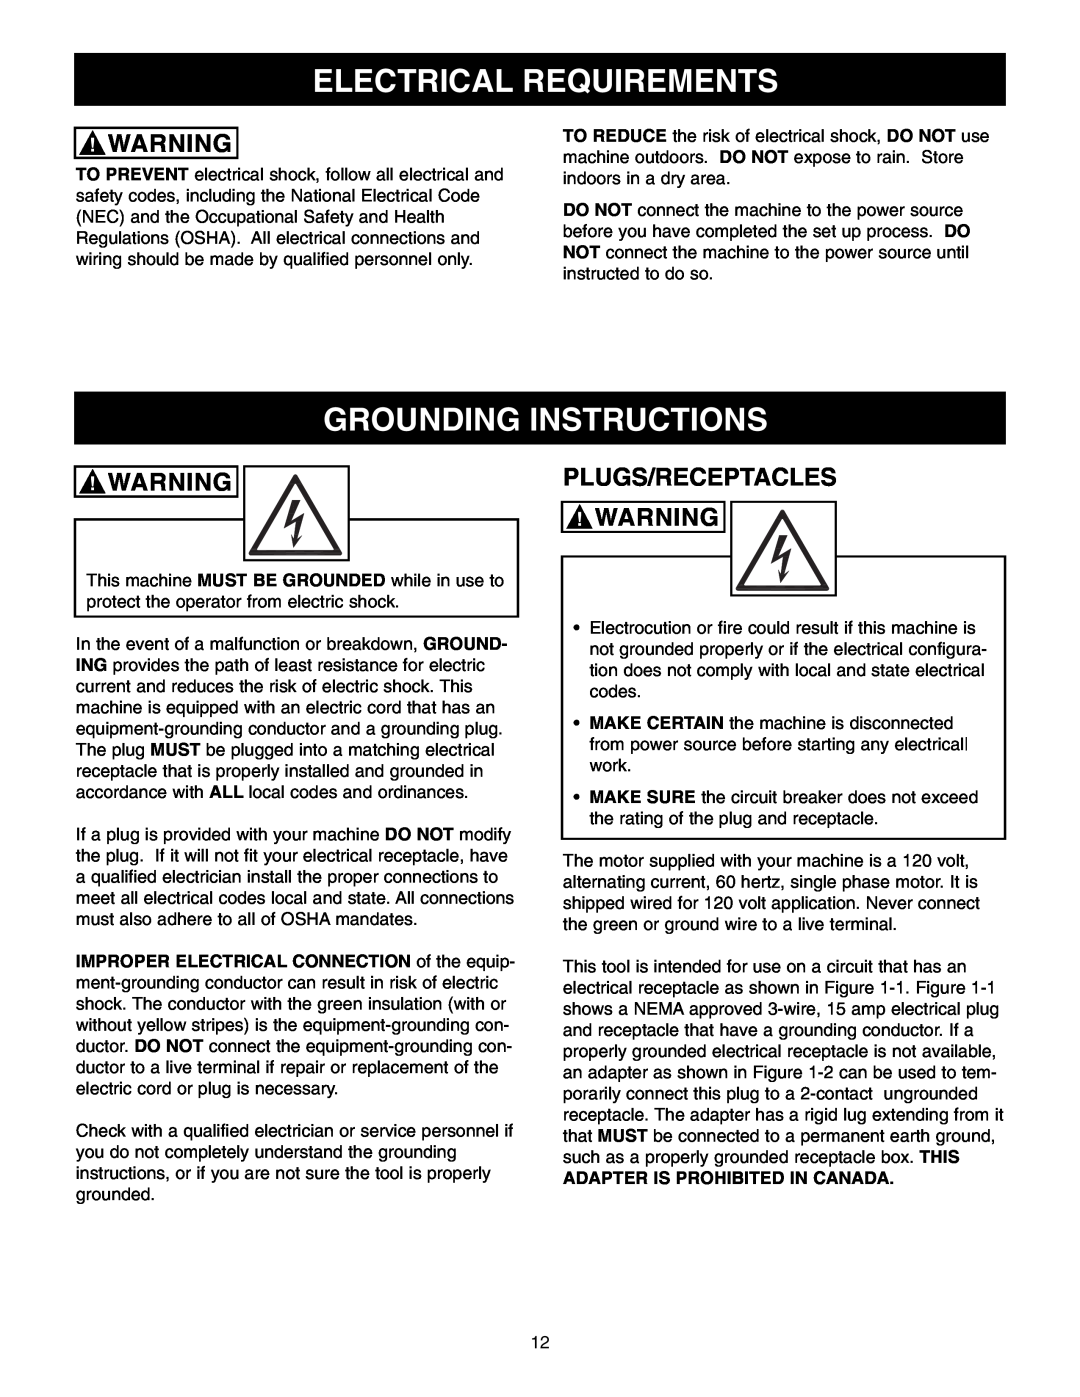 Craftsman 65100 user manual Electrical Requirements, Grounding Instructions, Plugs/Receptacles 